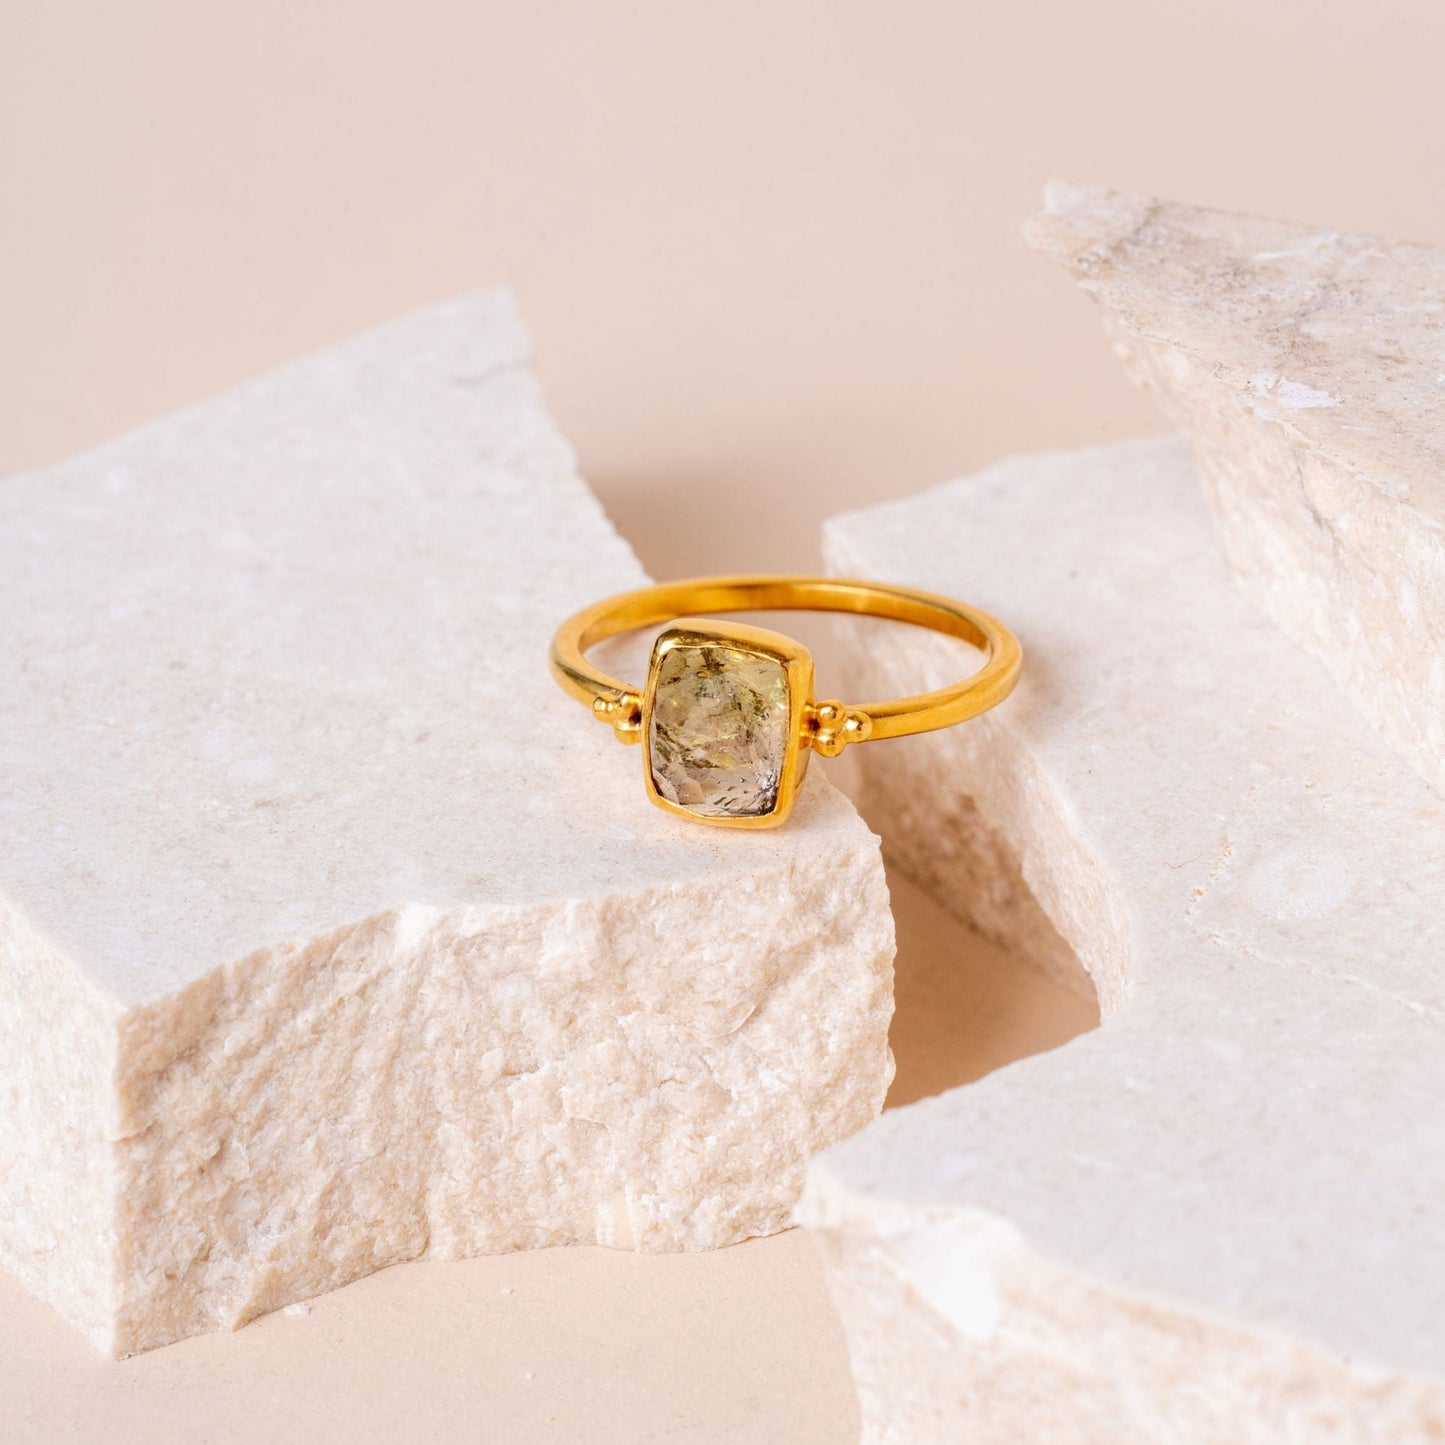 A rich gold ring featuring delicate granulation, elegantly framing a hand-cut olive-coloured natural gemstone.